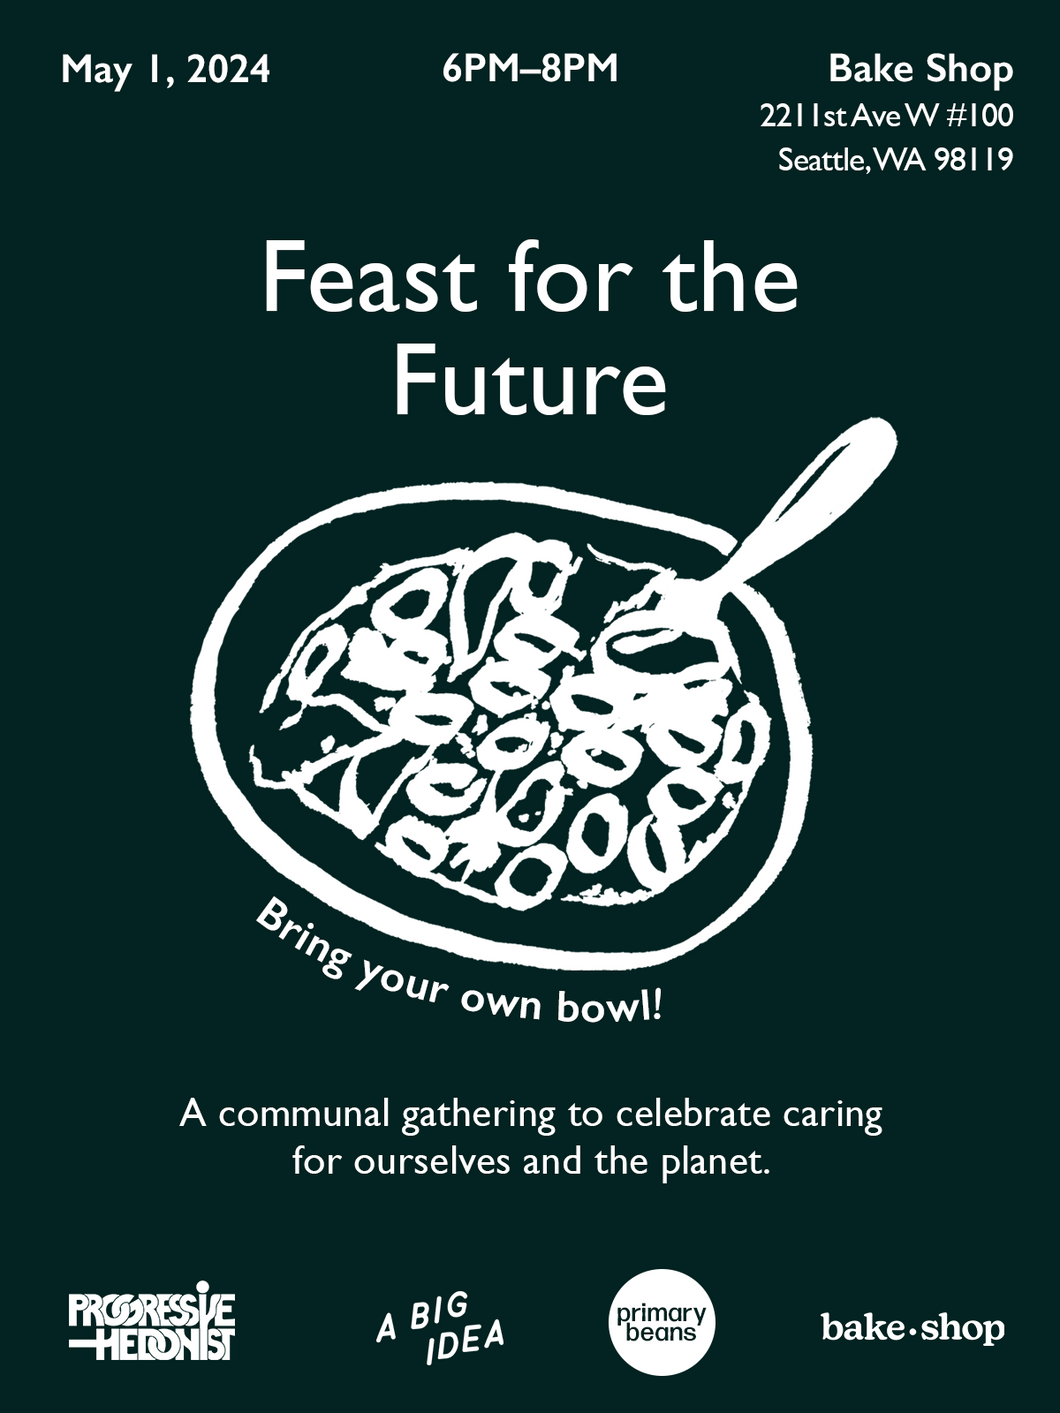 Feast for the Future Tickets